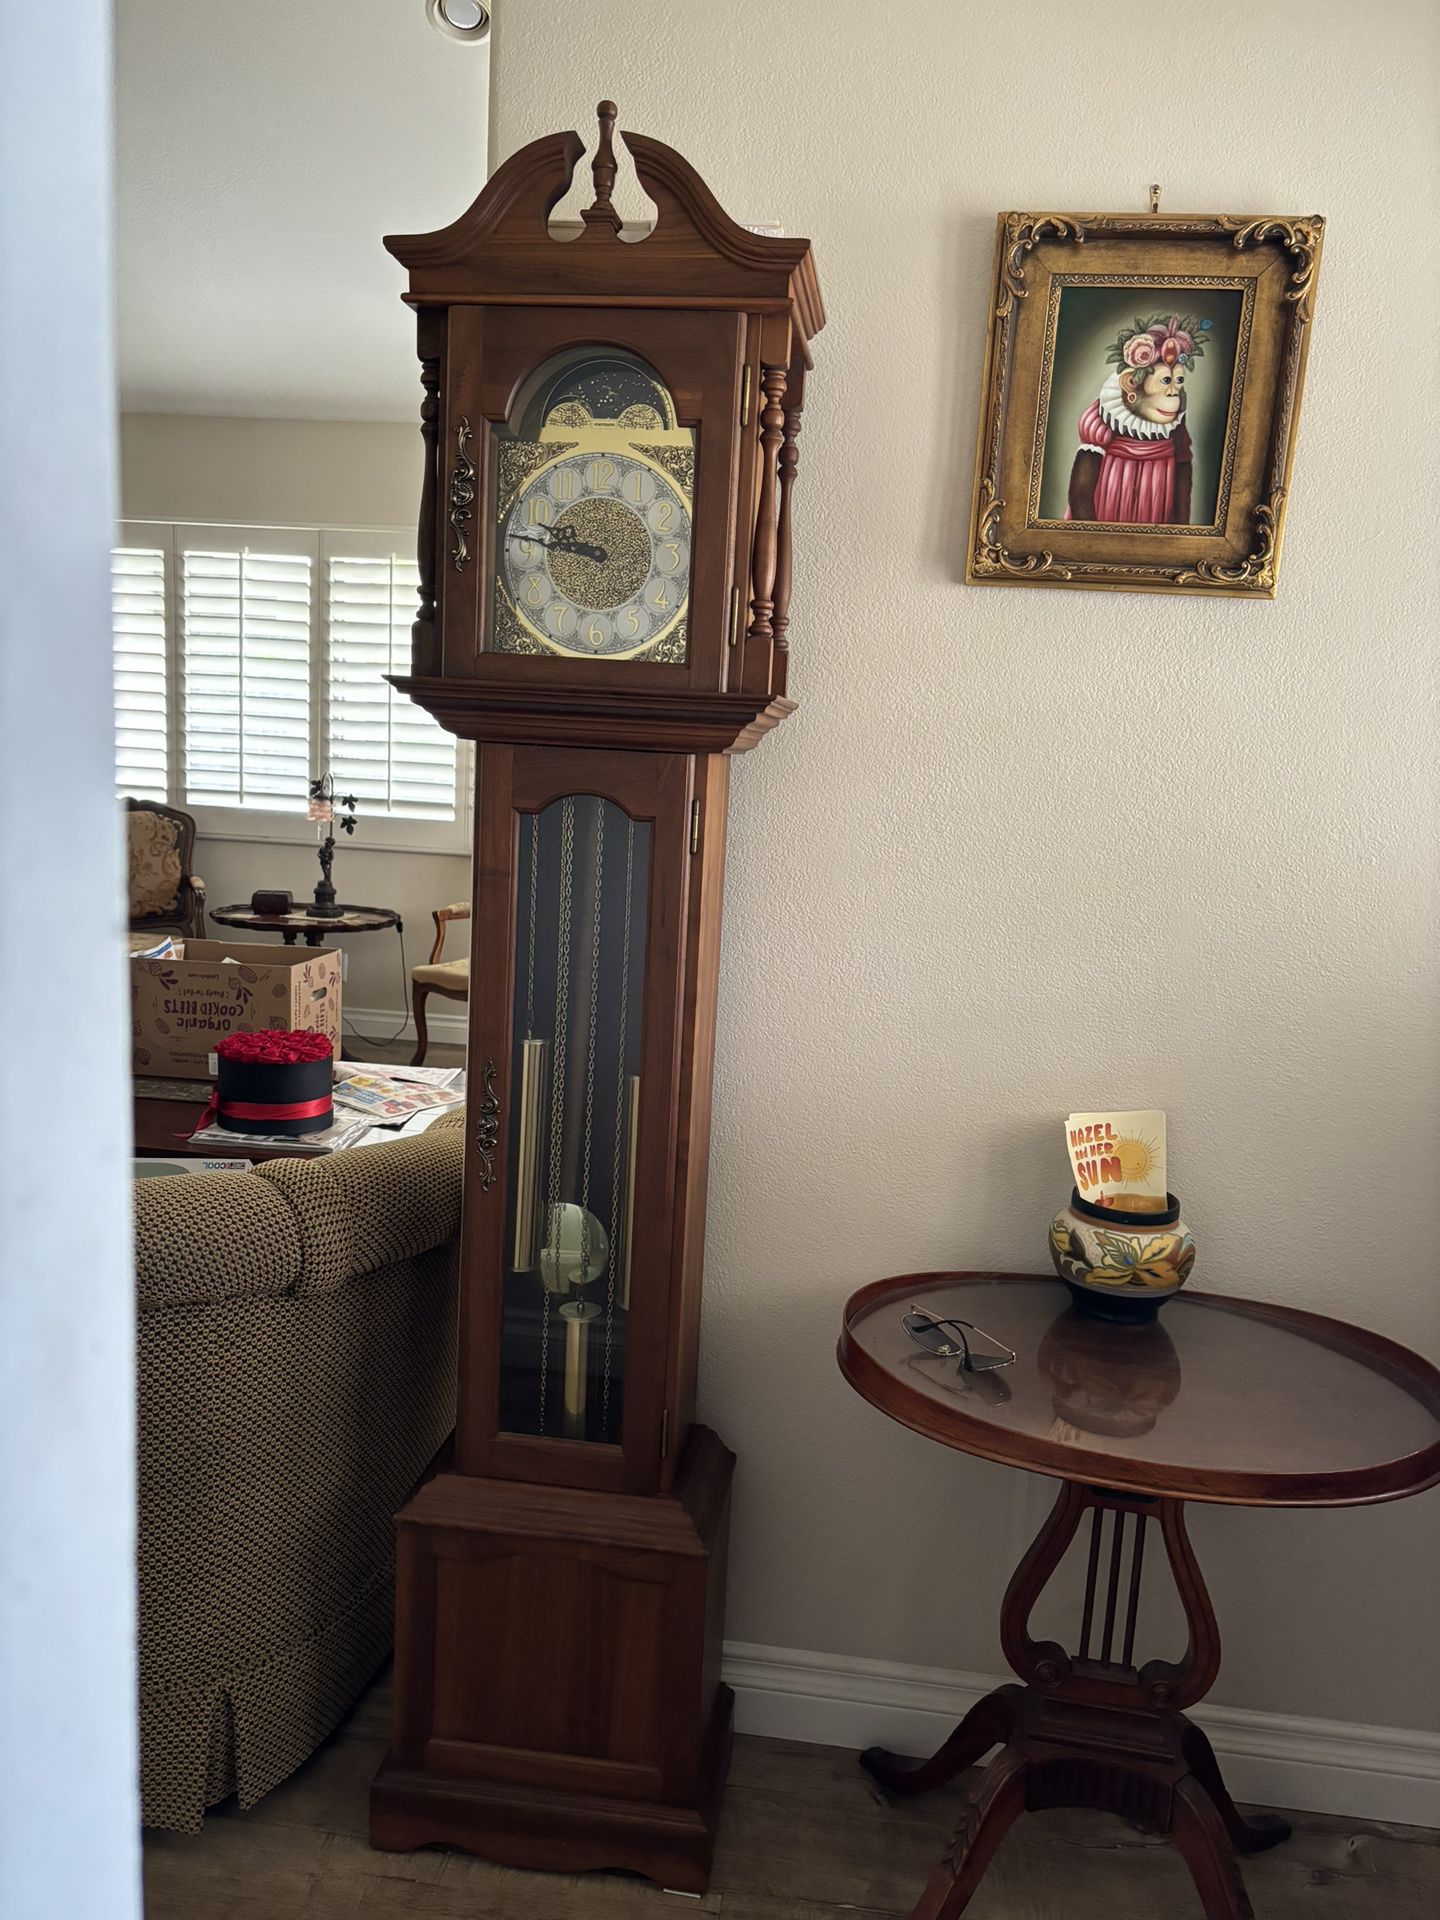 Grand Father Clock Emperor 100 - M , 6 Foot , Working & Chiming in Perfect Condition .